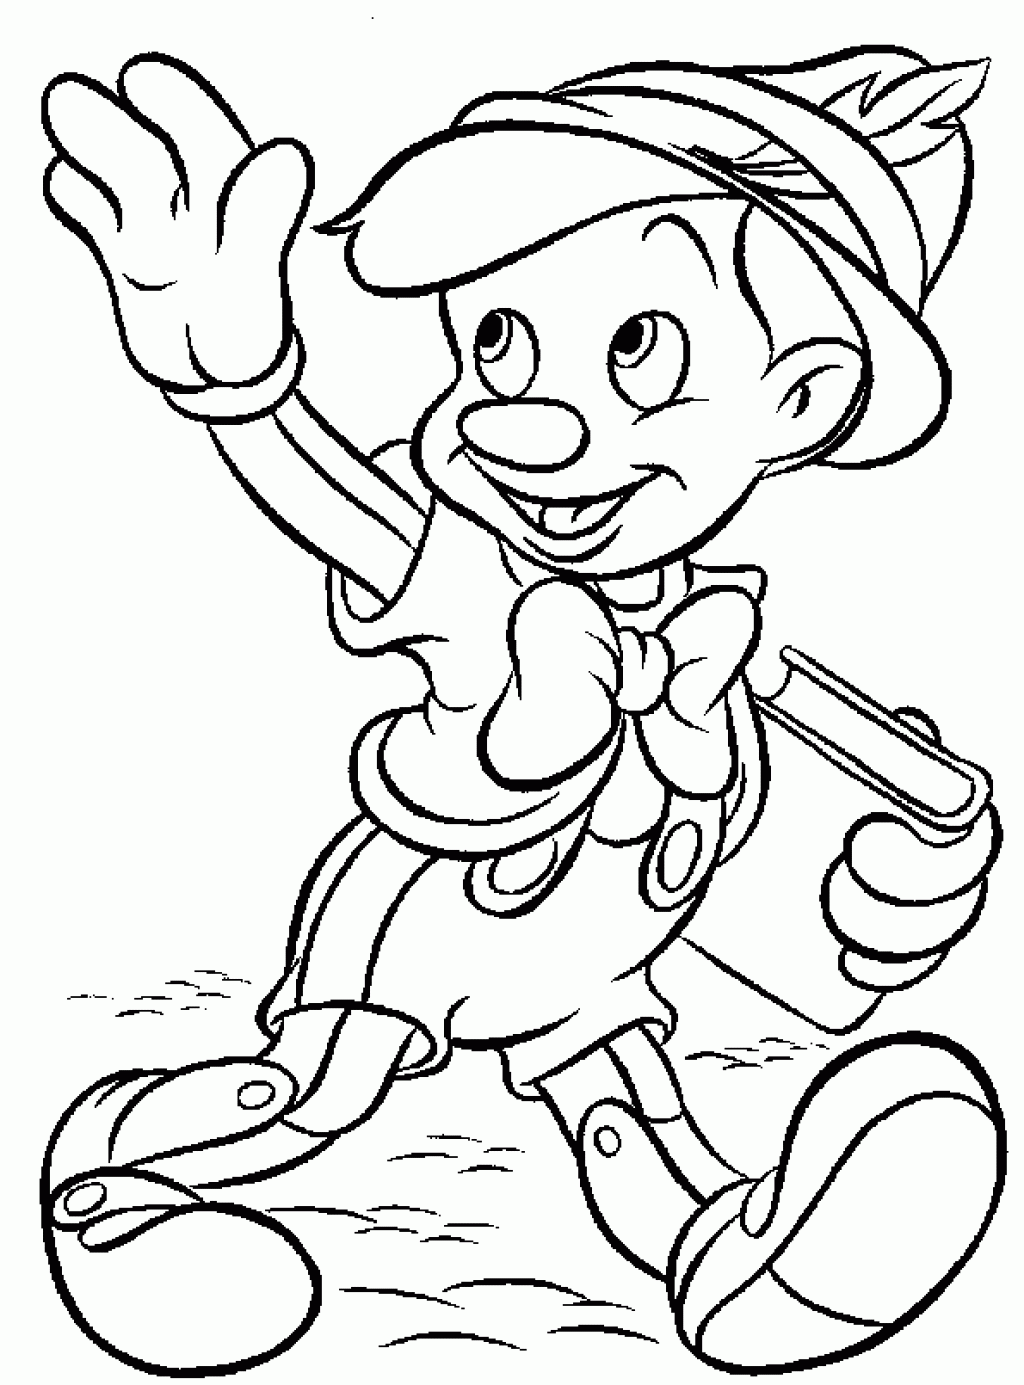 Download Free Printable Pinocchio Coloring Pages For Kids